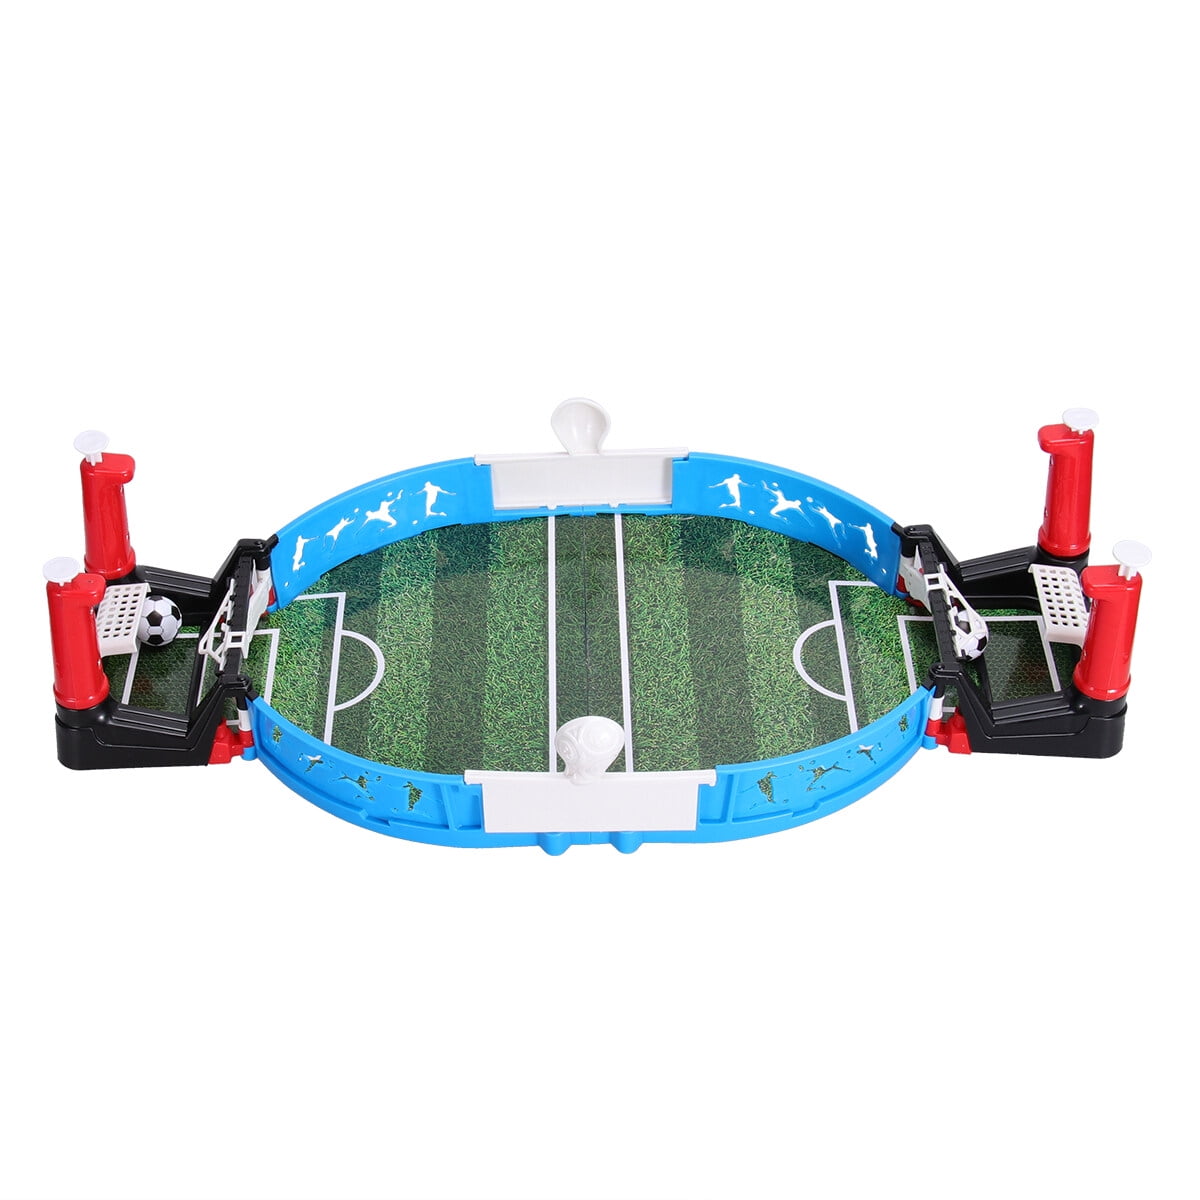 Profesional Table Wooden Mini Soccer Football Game For Kids Game Toy 